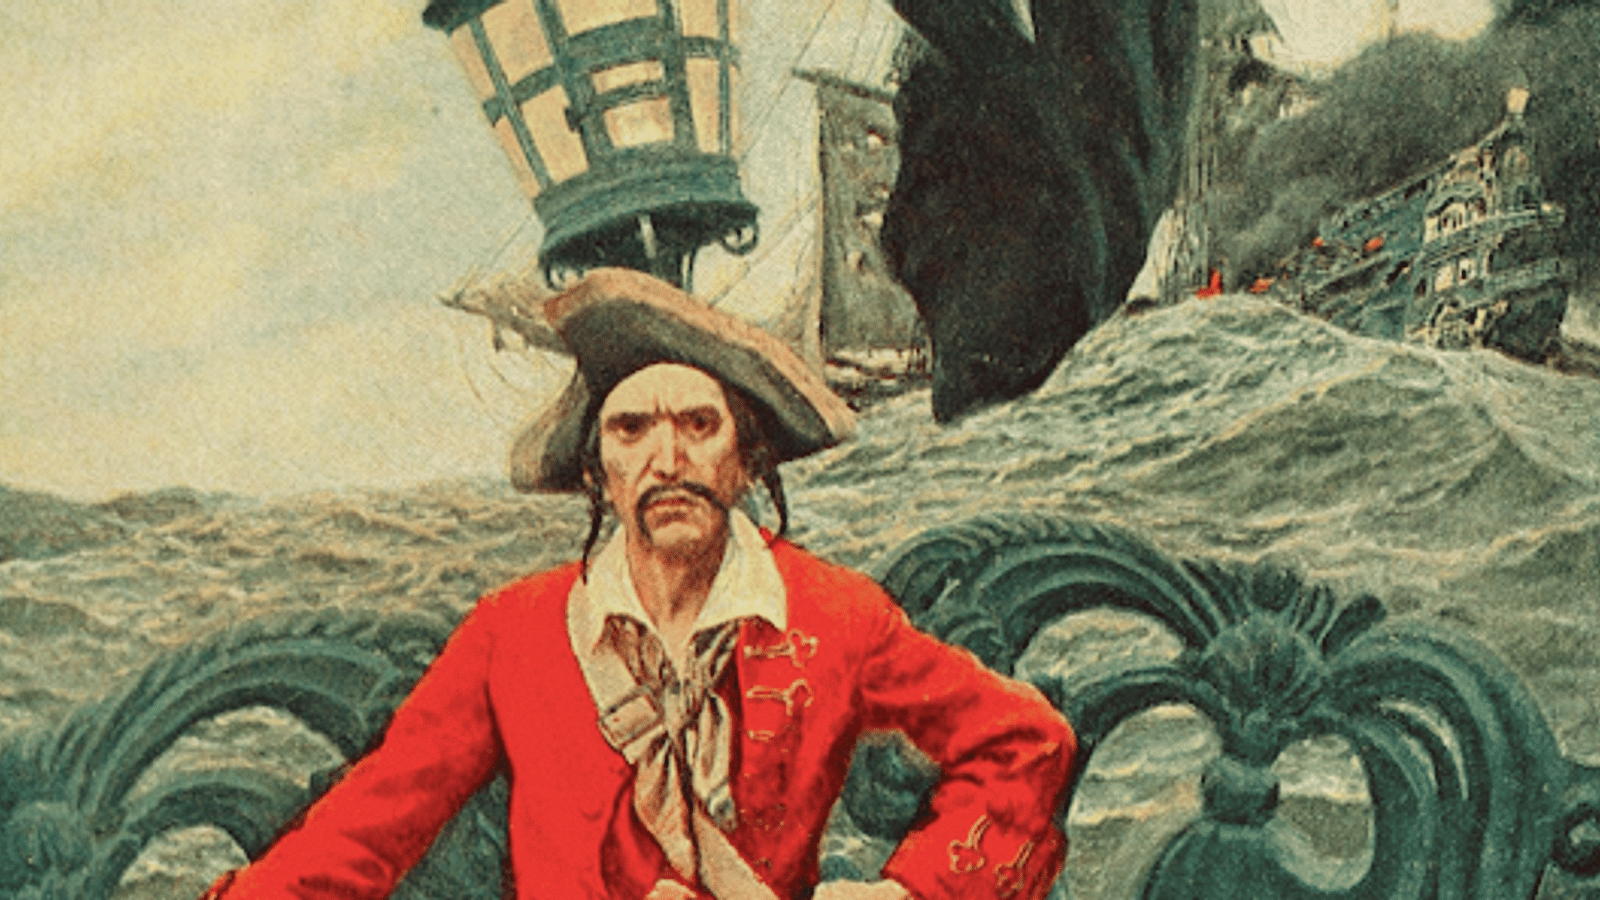 An A to Z of Pirate & Seafaring Expressions - World History